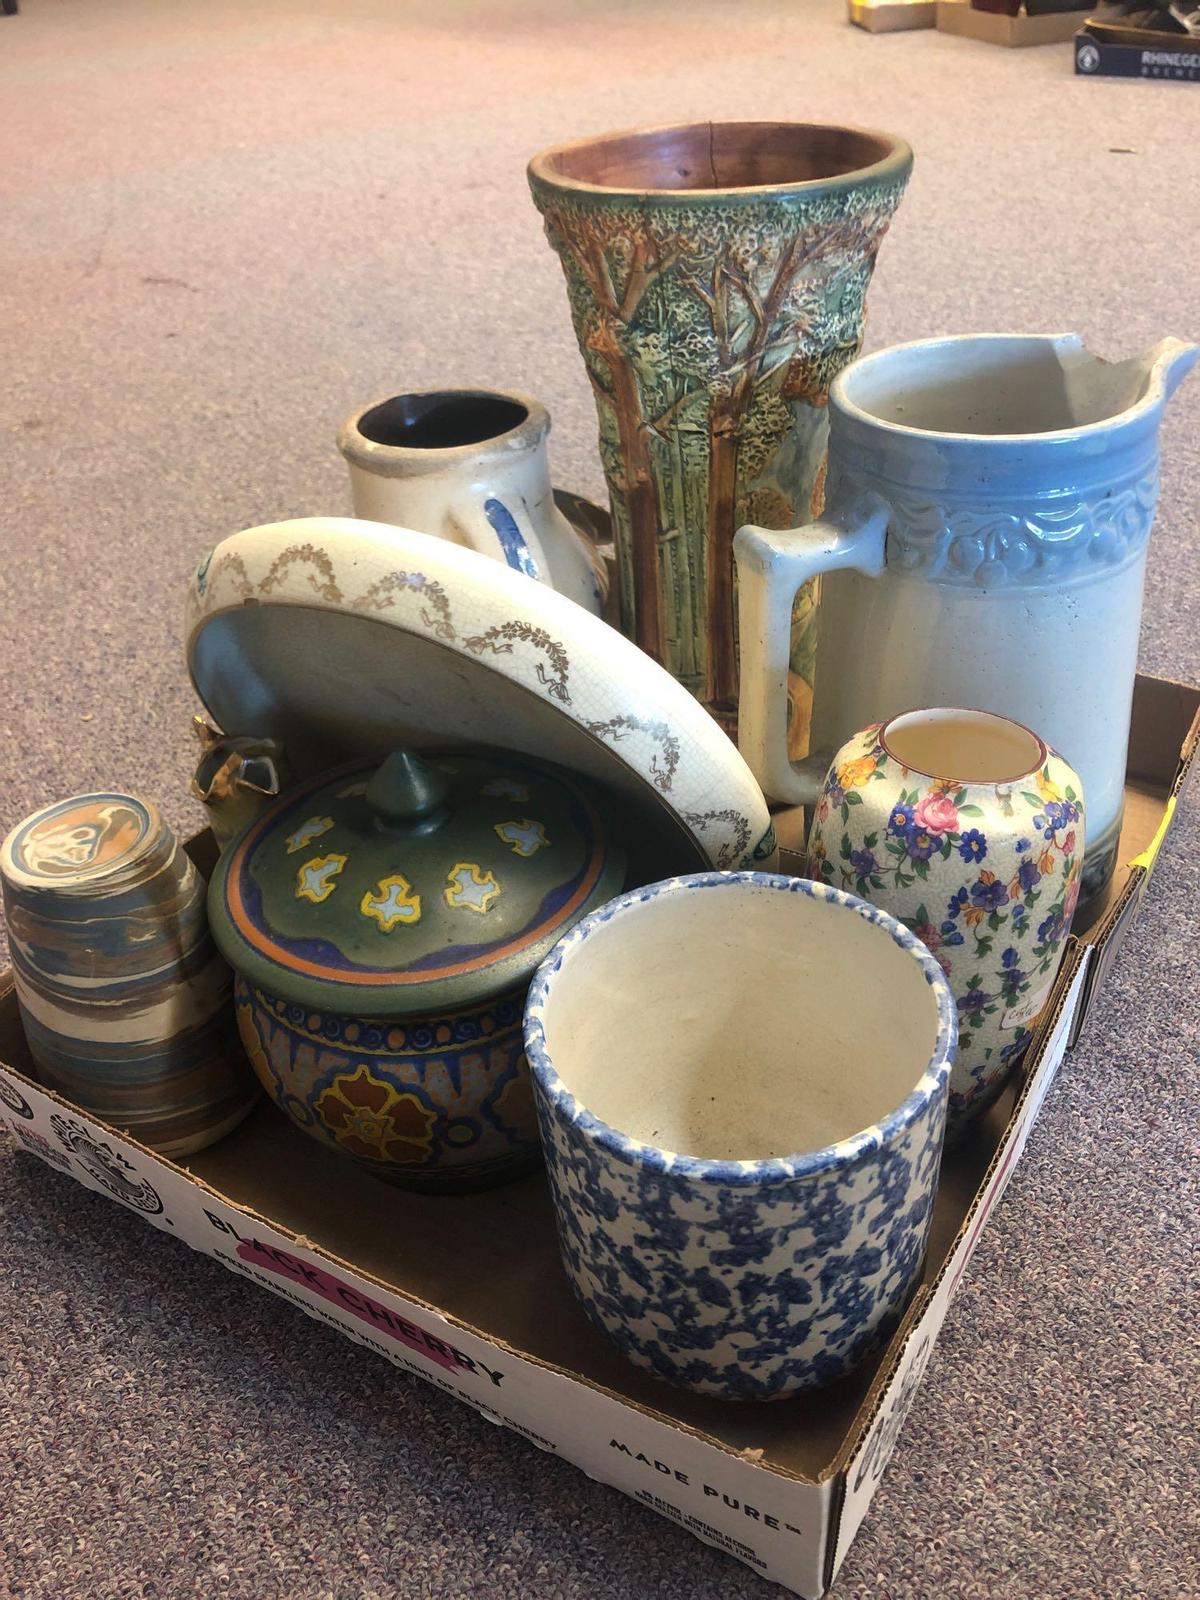 2 flats pottery vases, pitchers, etc, most is chipped or cracked or repaired